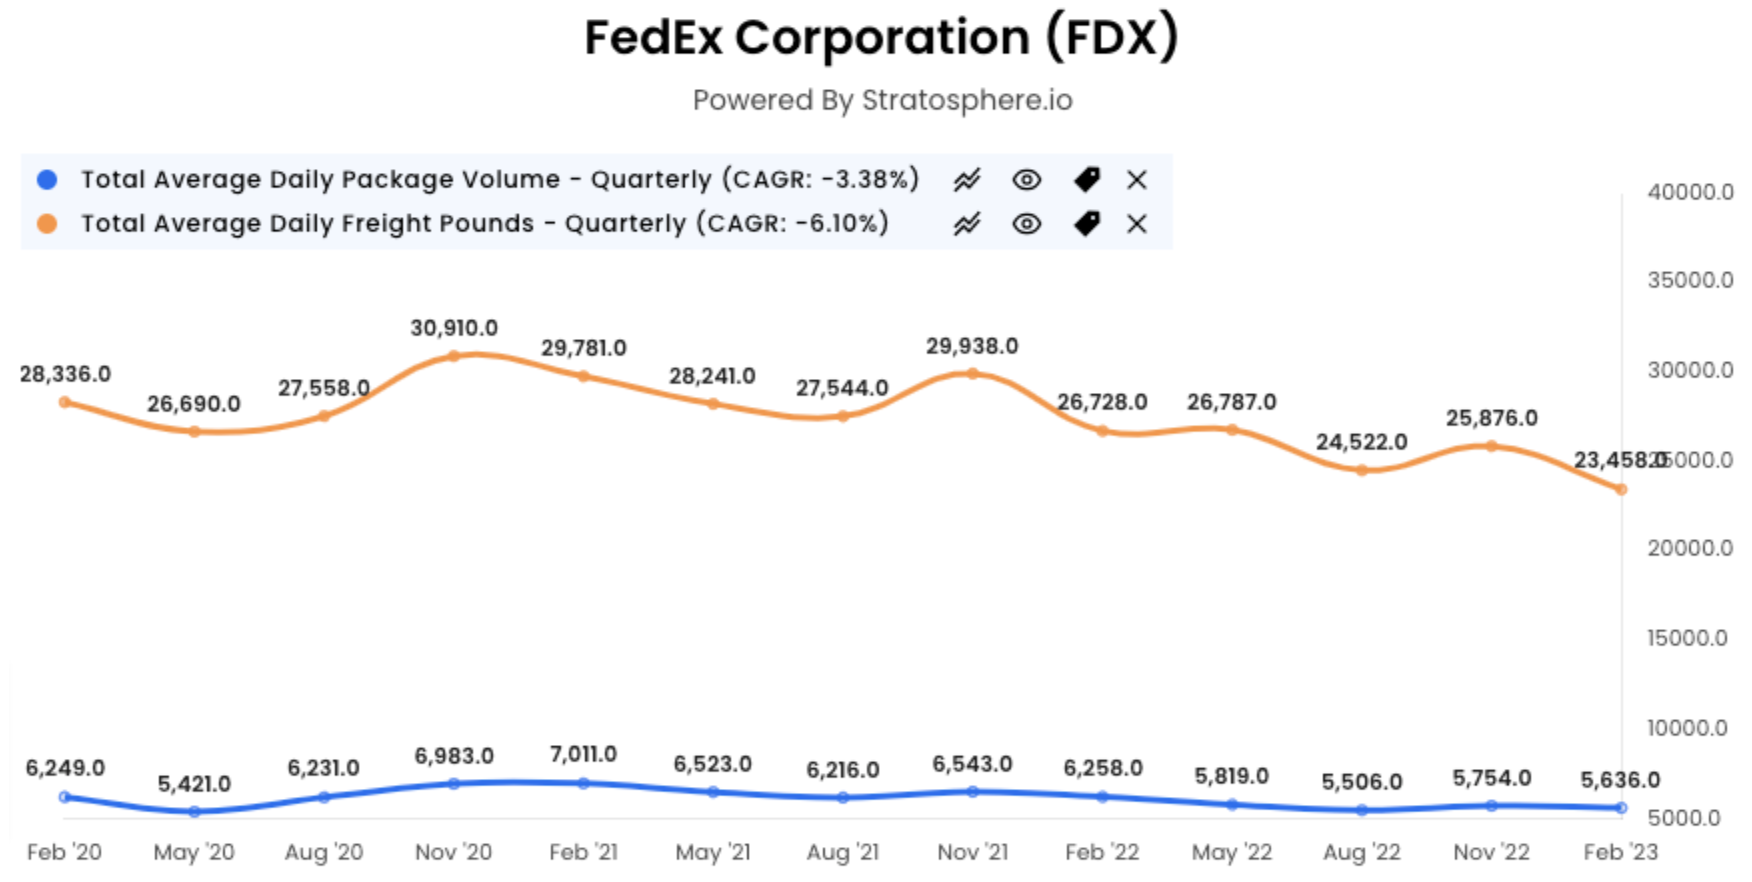 FedEx Corporation total average daily package volumes and average daily freight pounds graph